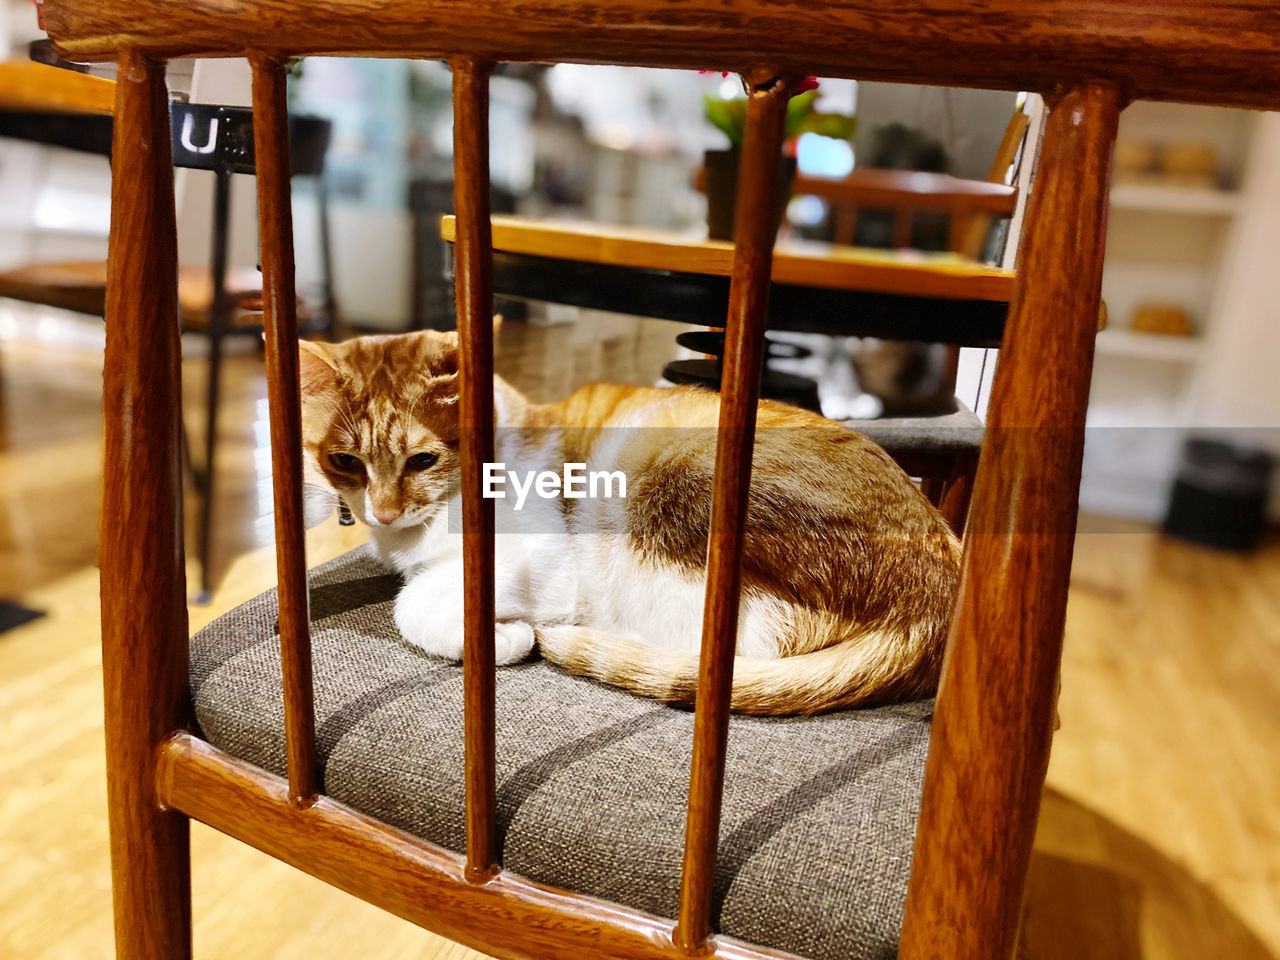 PORTRAIT OF A CAT SITTING ON CHAIR IN A ROOM